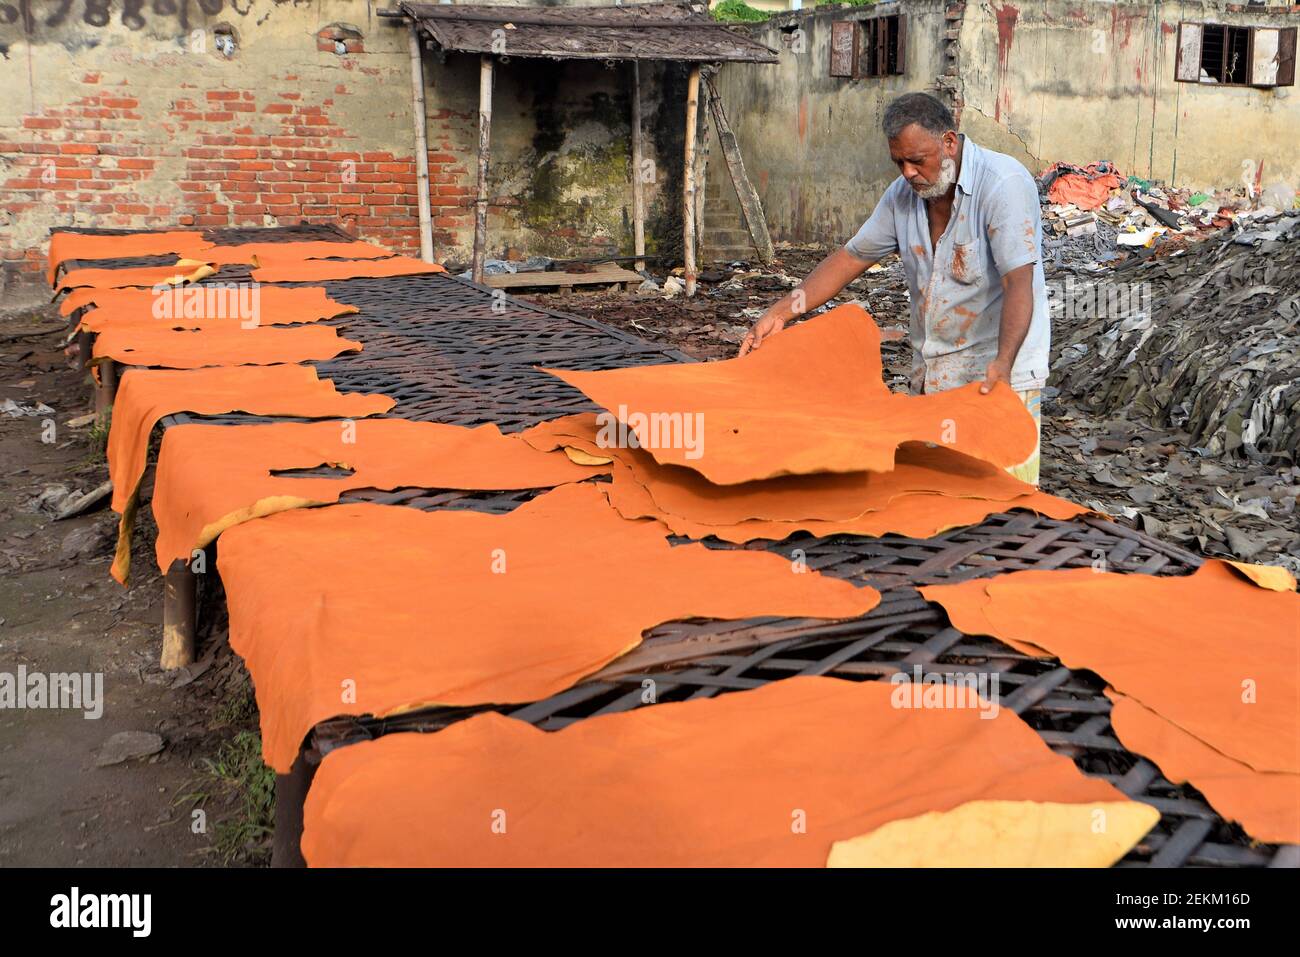 A worker displays the tanned animal hides he's working at a tannery  industry in Hazaribagh, Dhaka. Most of this area people have become victims  of pollution due to the presence of toxic